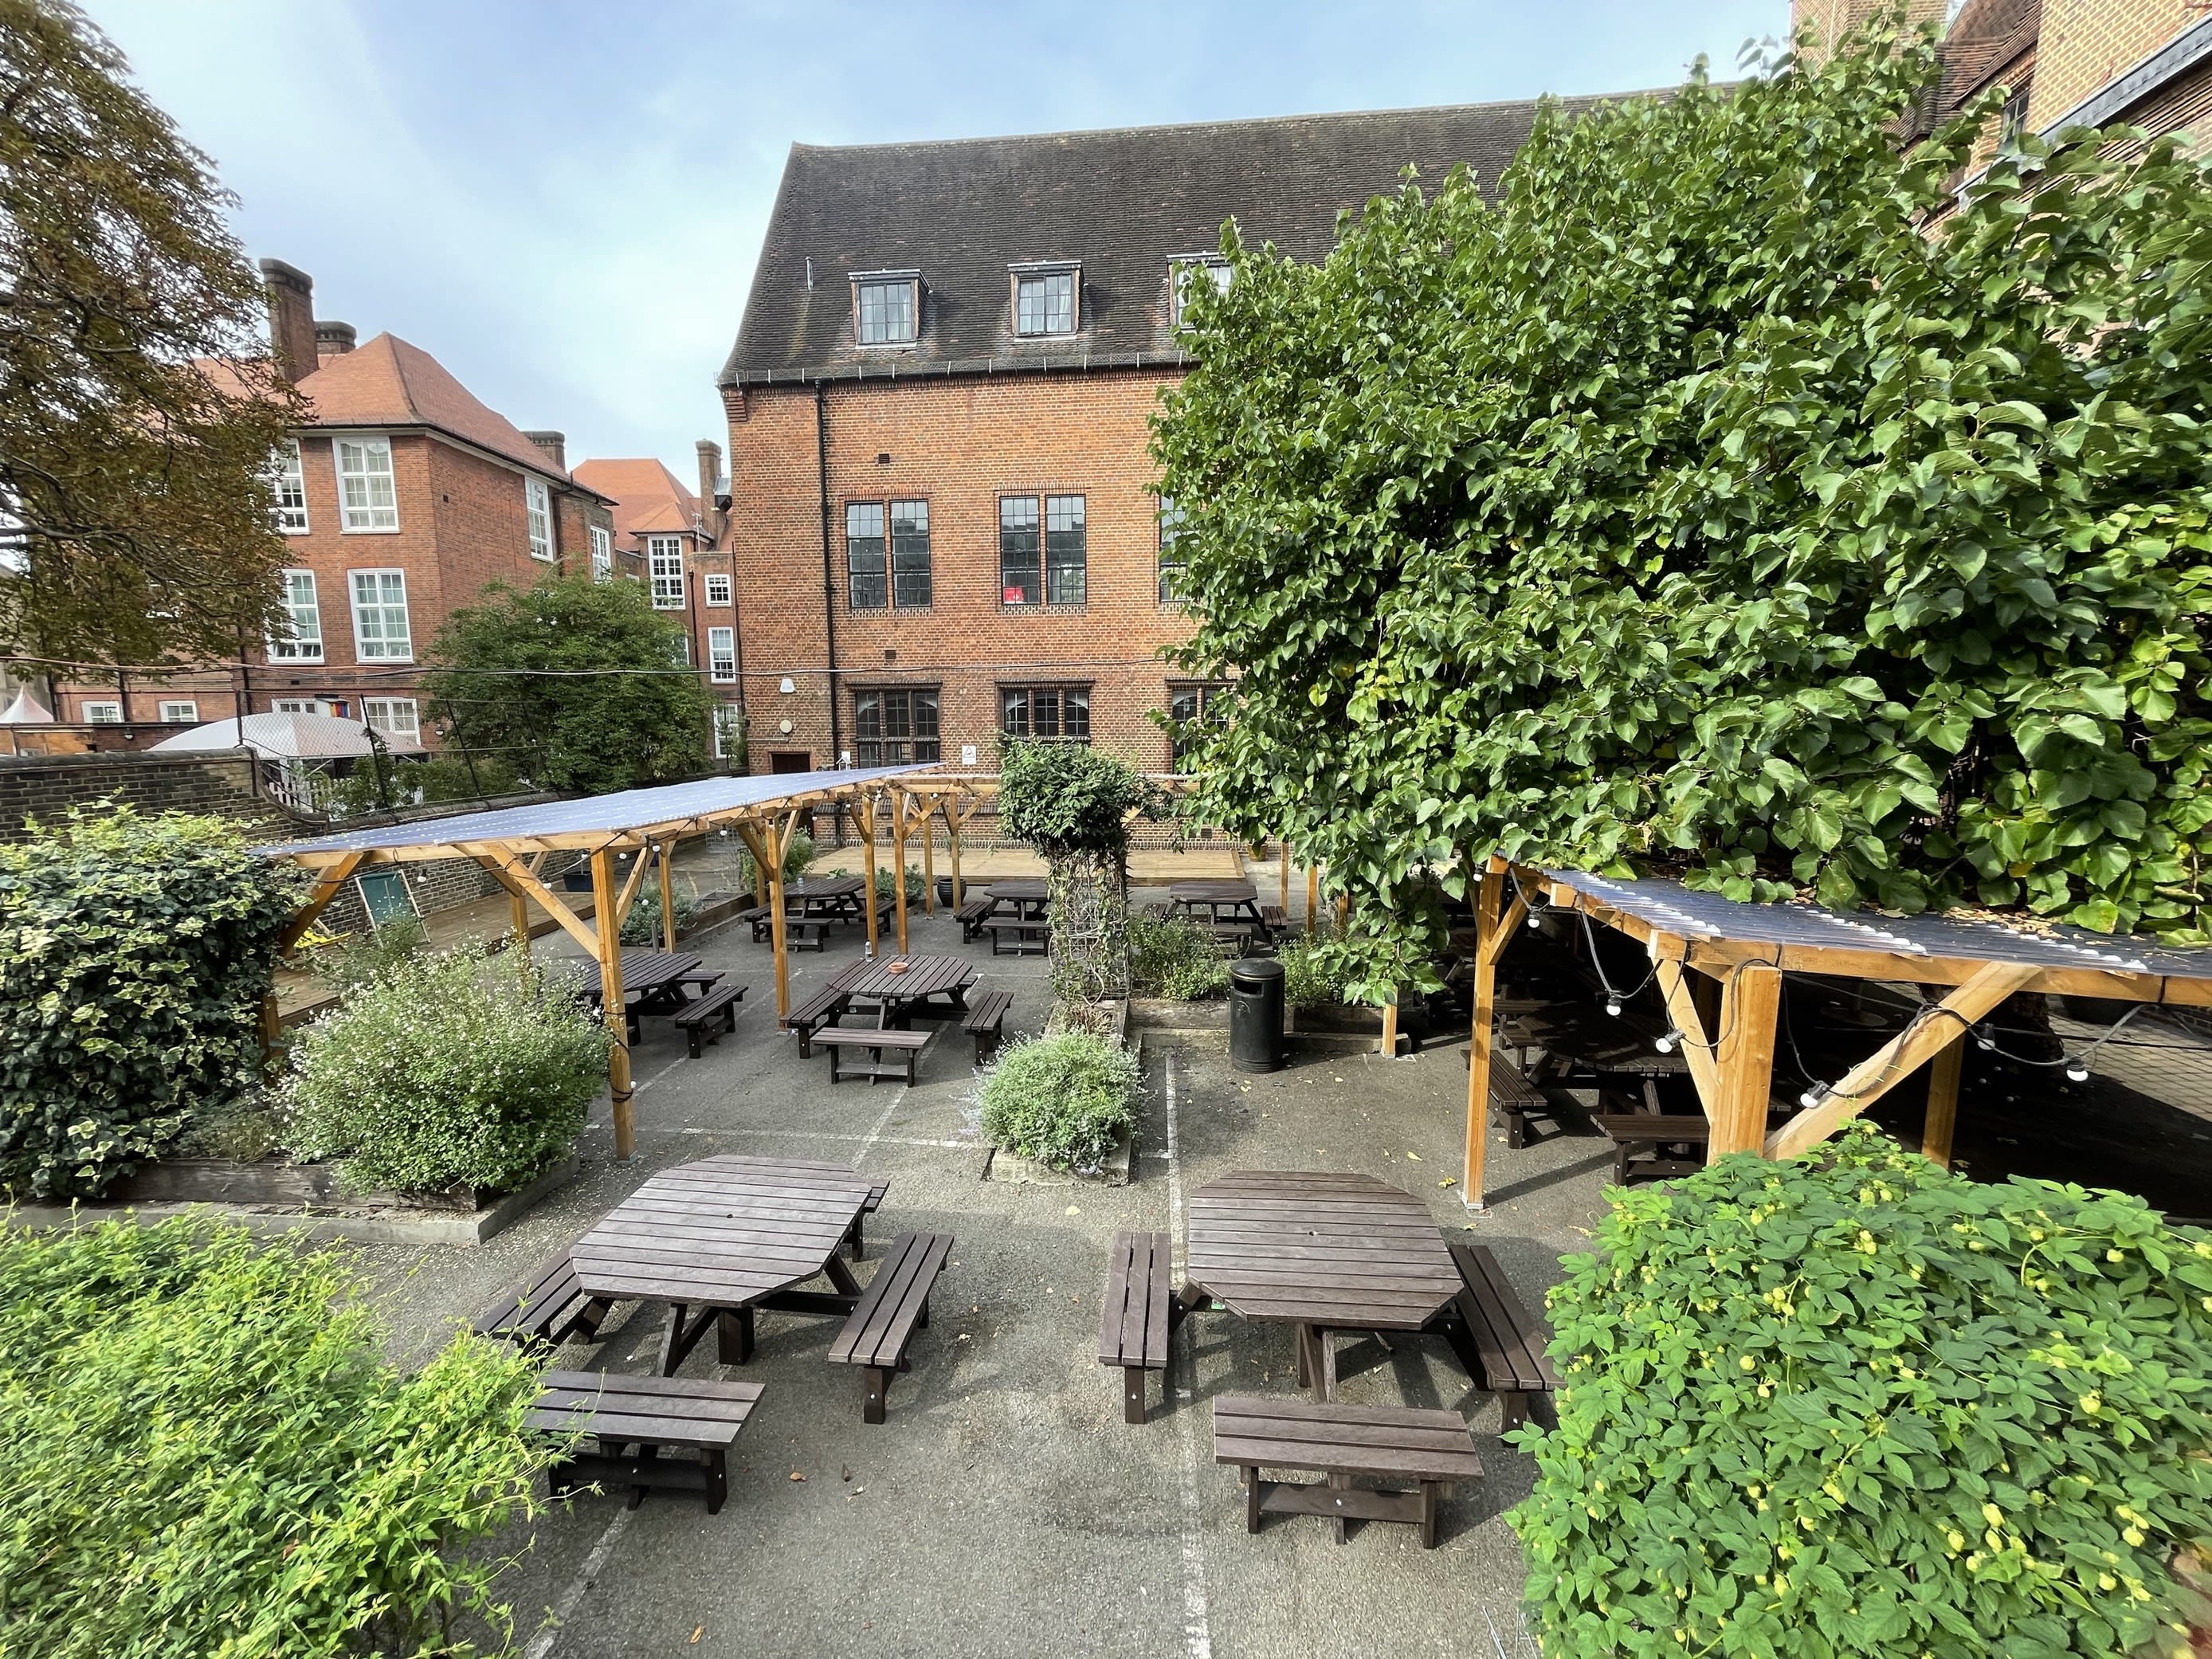 Full view of garden at Lime Grove, showing two wooden tables and seating and lots of trees.